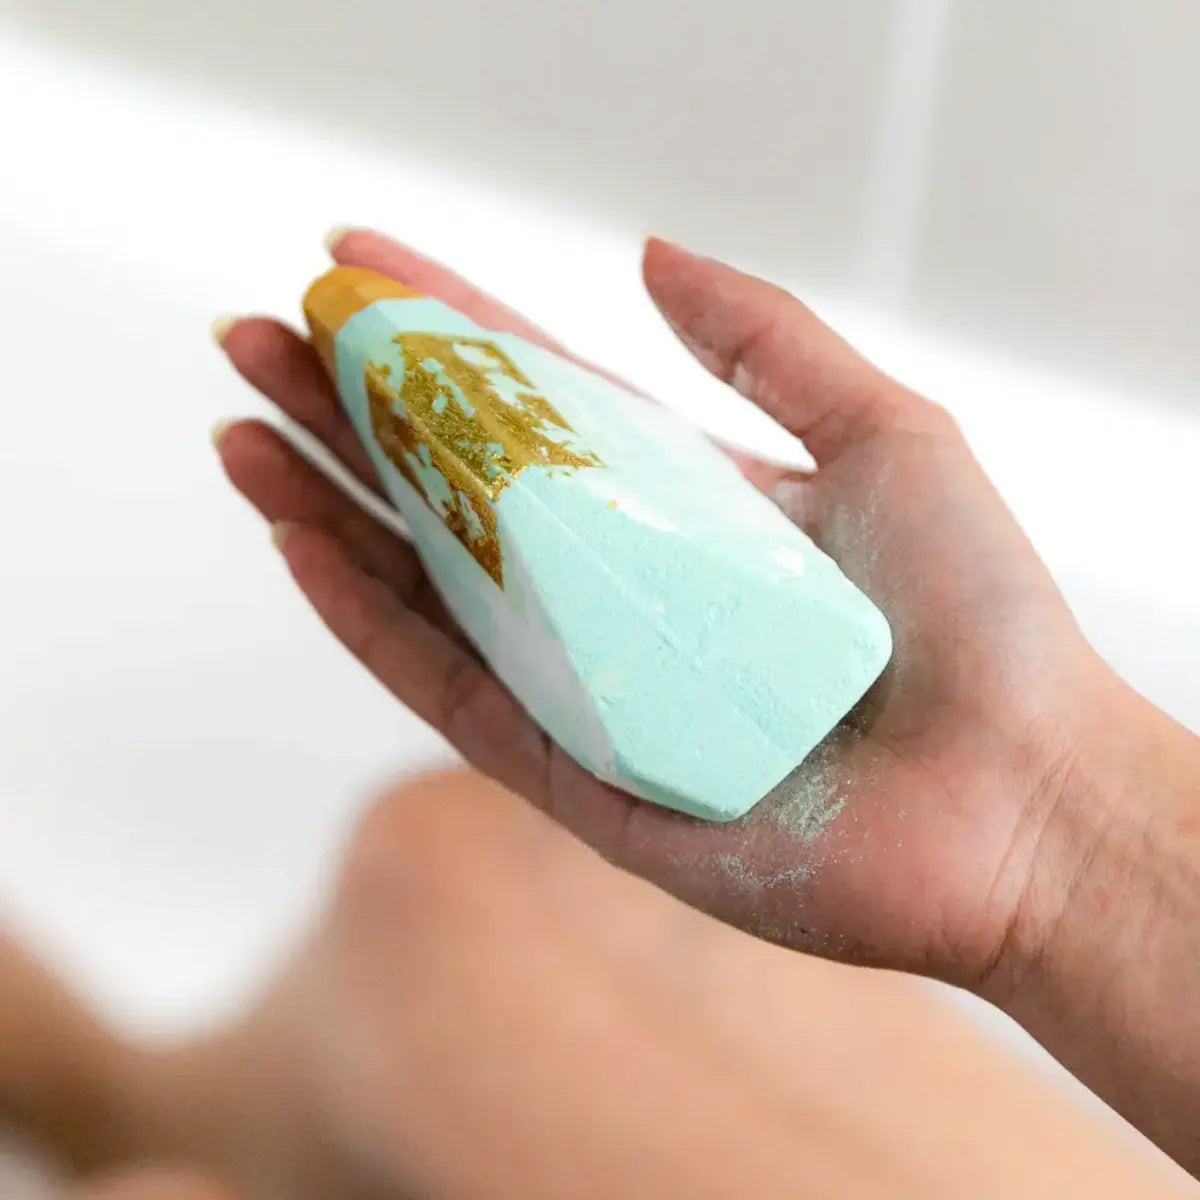 A person indulging in aromatherapy while holding a Summer Salt Body Crystal Bath Bomb - Aquamarine - Lemongrass in a bathtub.